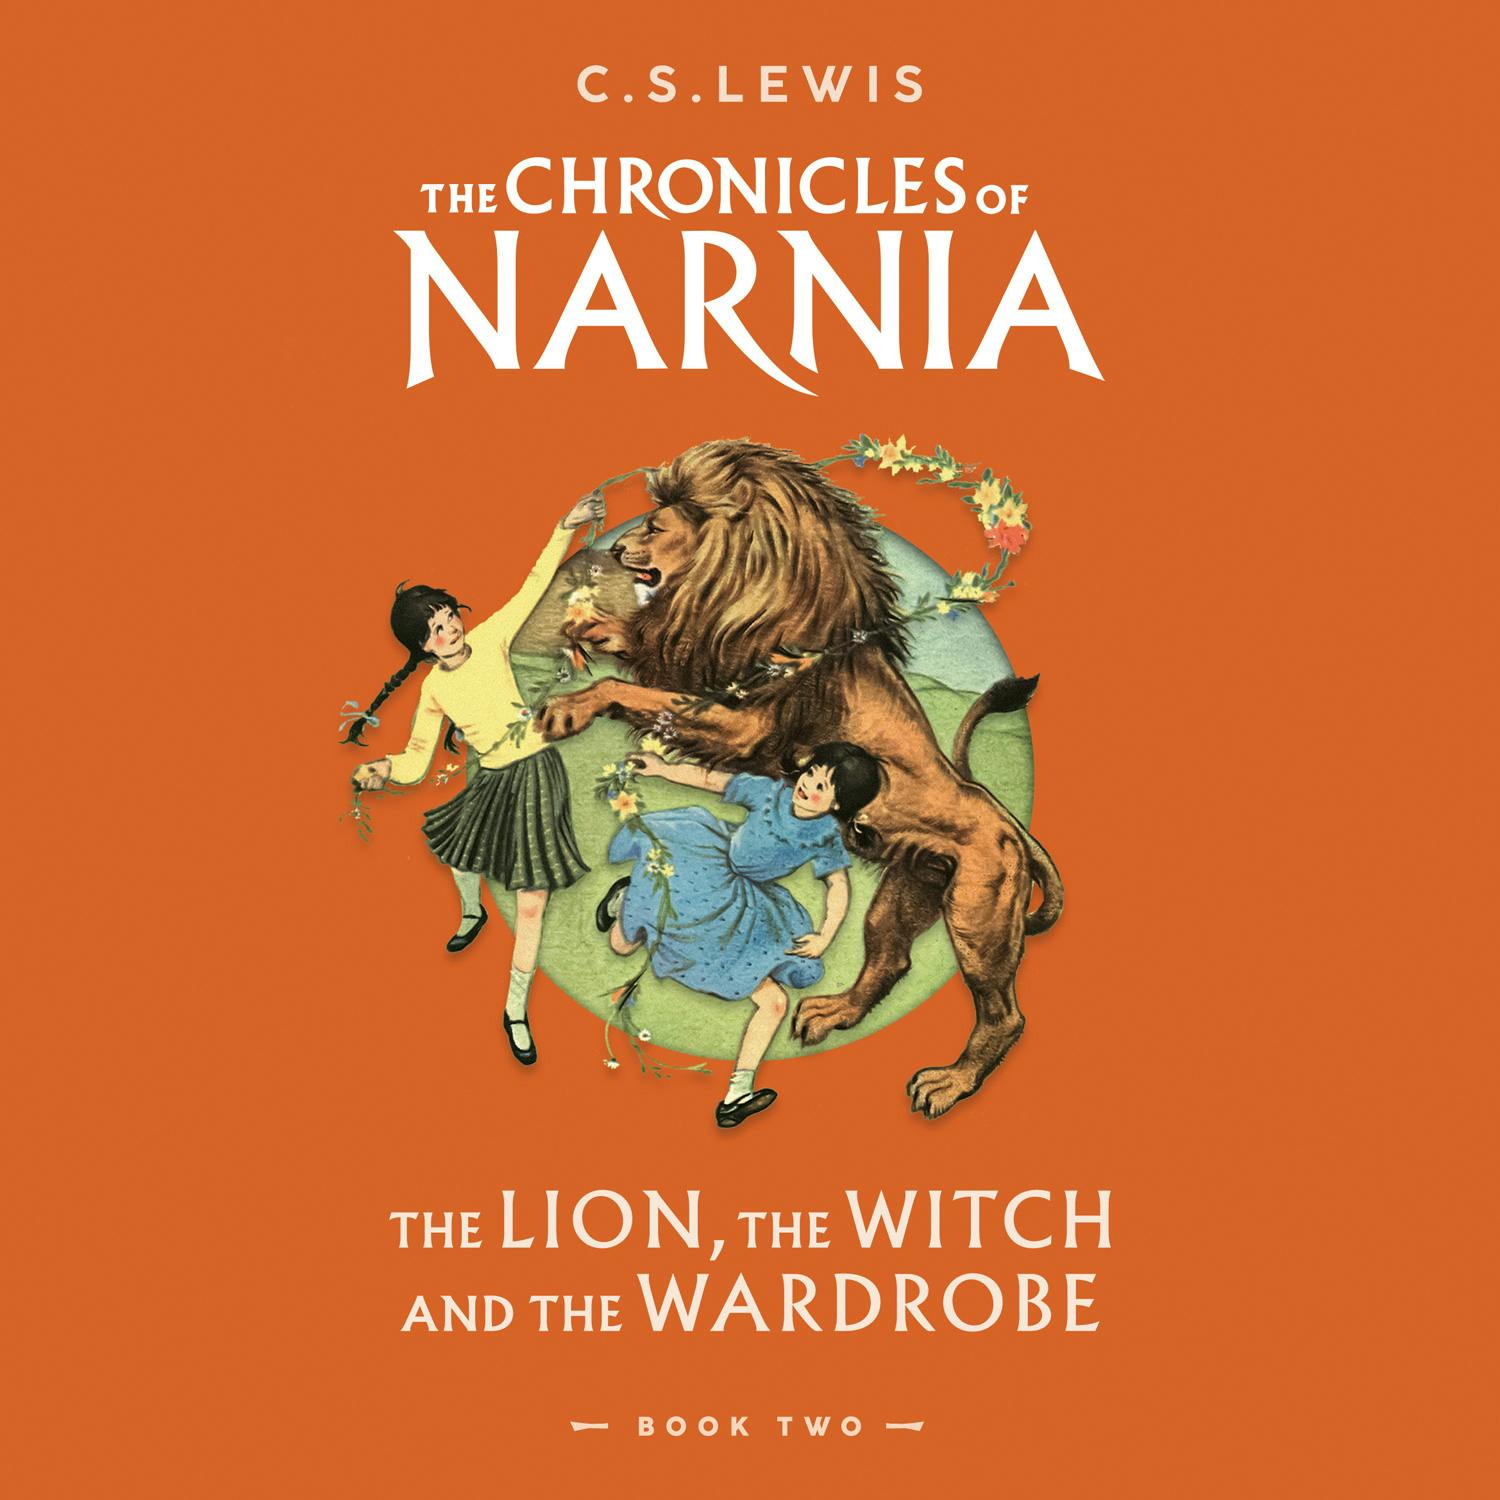 The Lion, the Witch and the Wardrobe - undefined